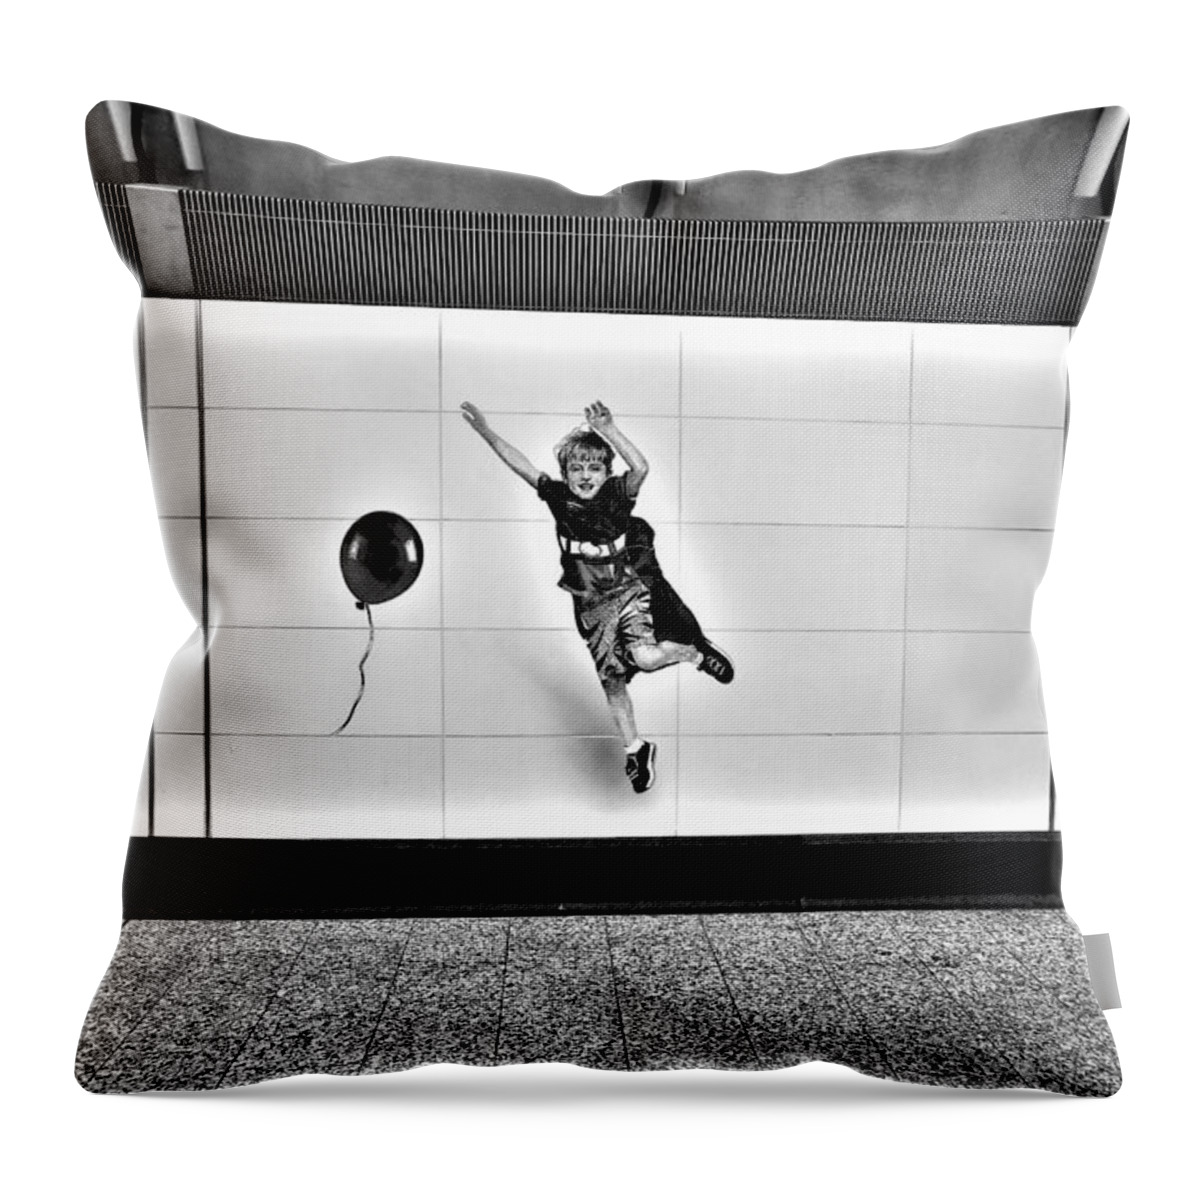 Art Throw Pillow featuring the photograph 2nd Ave Subway Art Perfect Strangers16 B W by Rob Hans